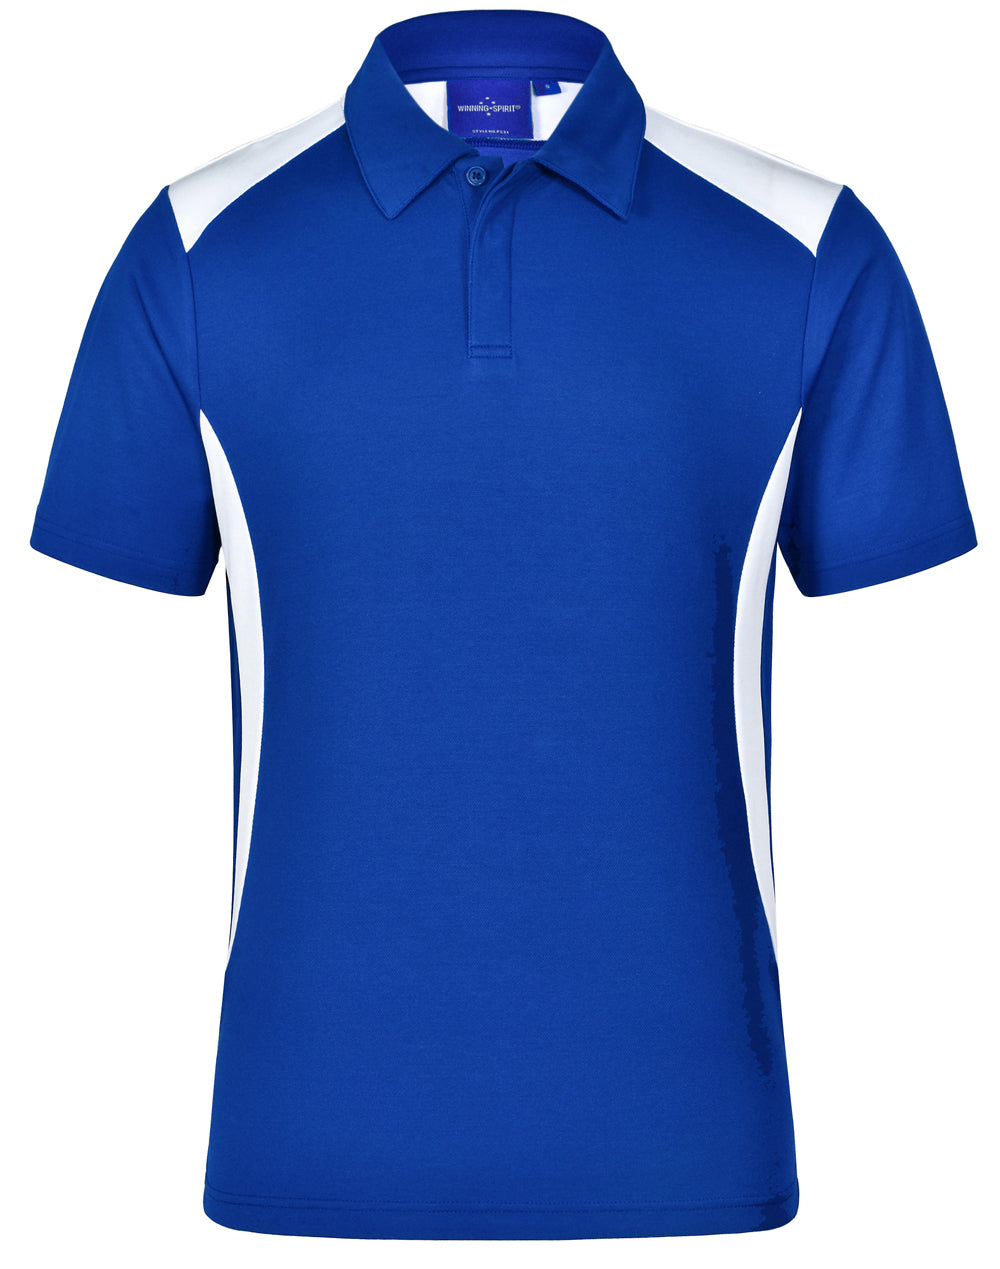 Truedry Contrast Polo Shirt - made by AIW